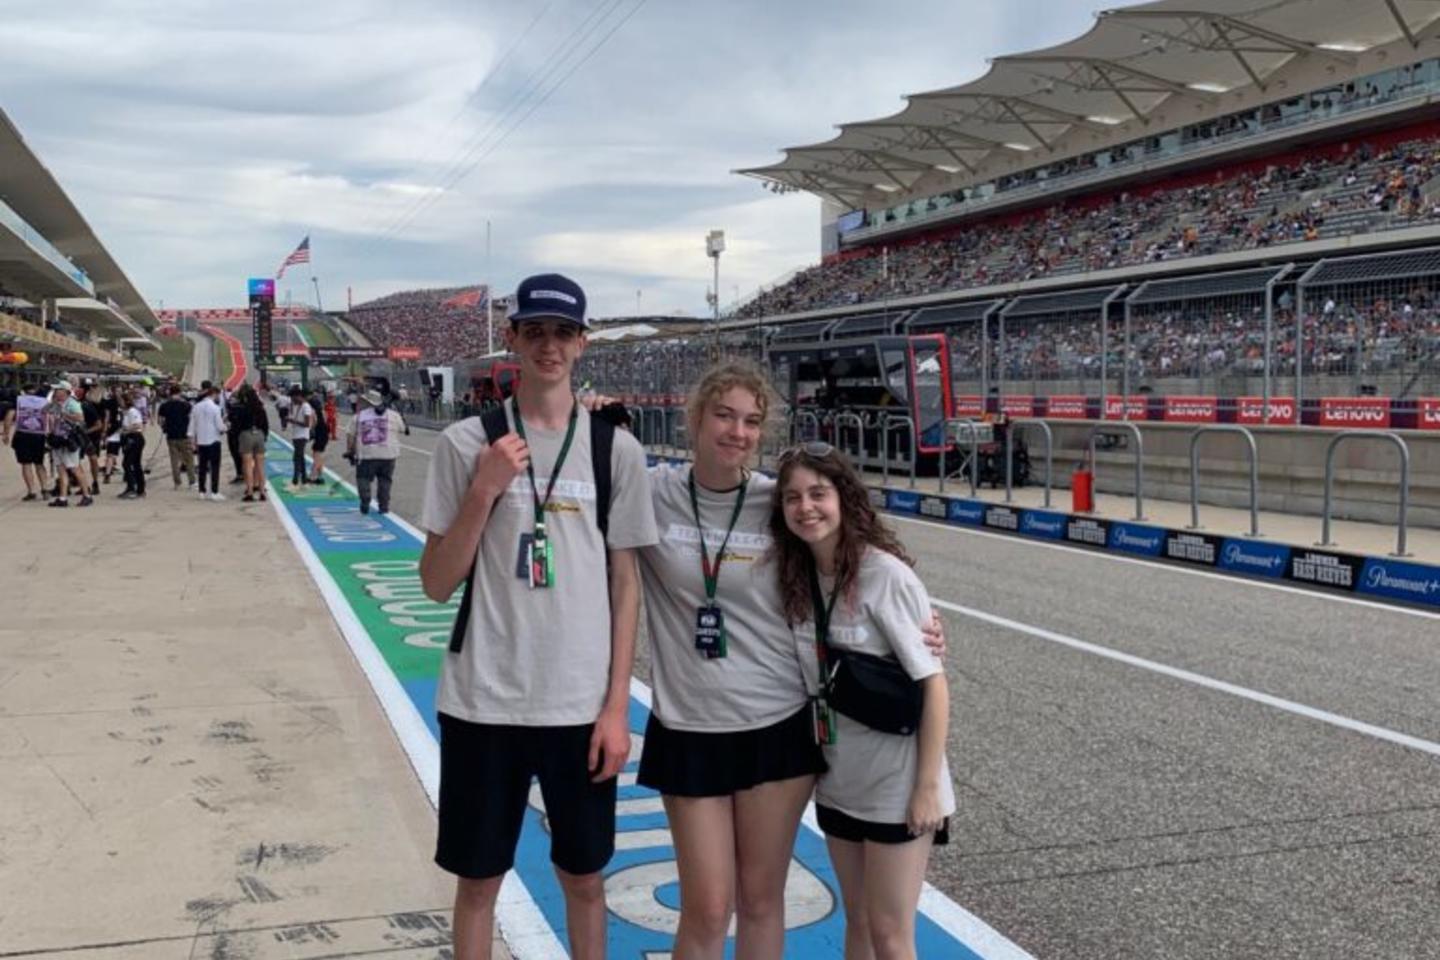 Students attend Formula 1 race in Austin, TX